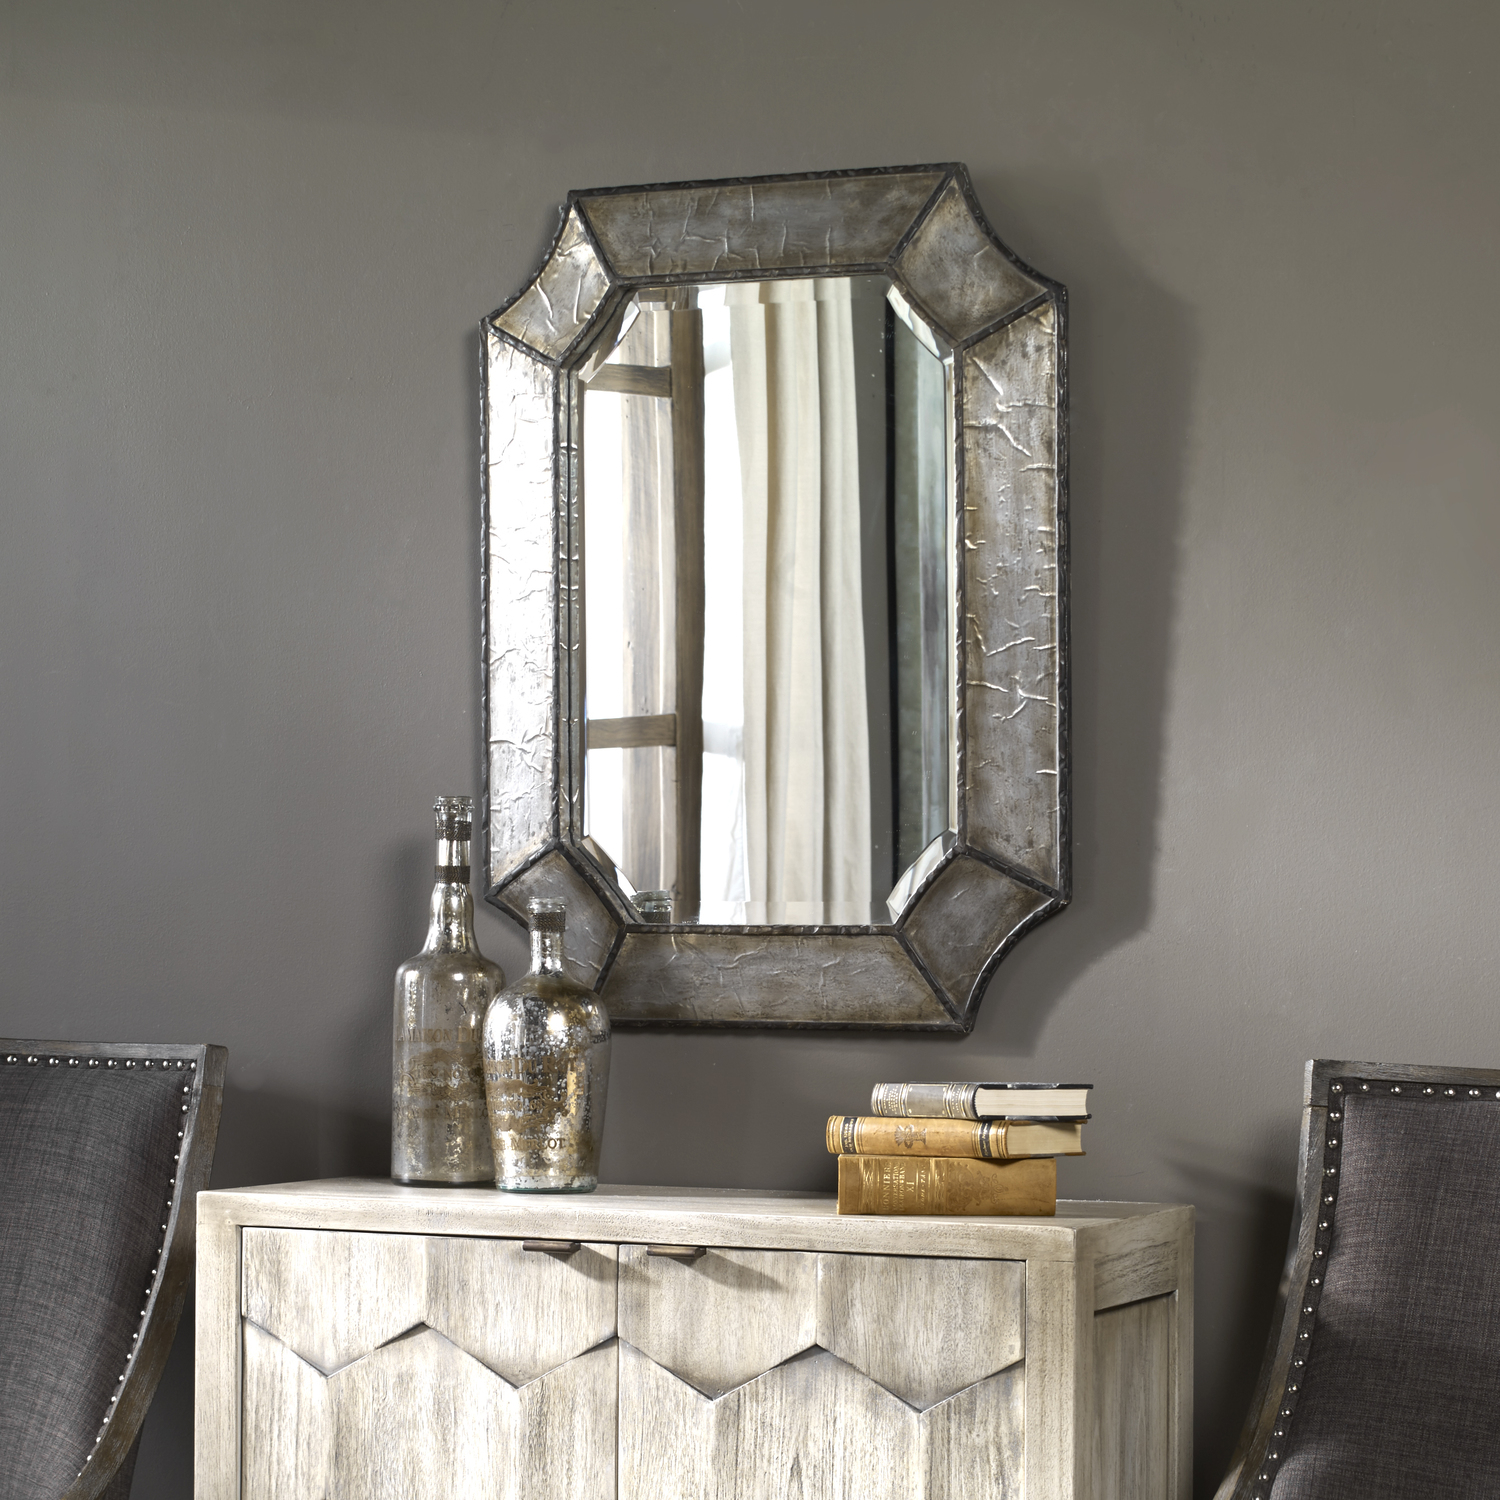 leaning mirror decorating ideas Uttermost Modern Rectangular Mirrors Distressed Hammered Aluminum With Burnished Edges And Rustic Bronze Details.